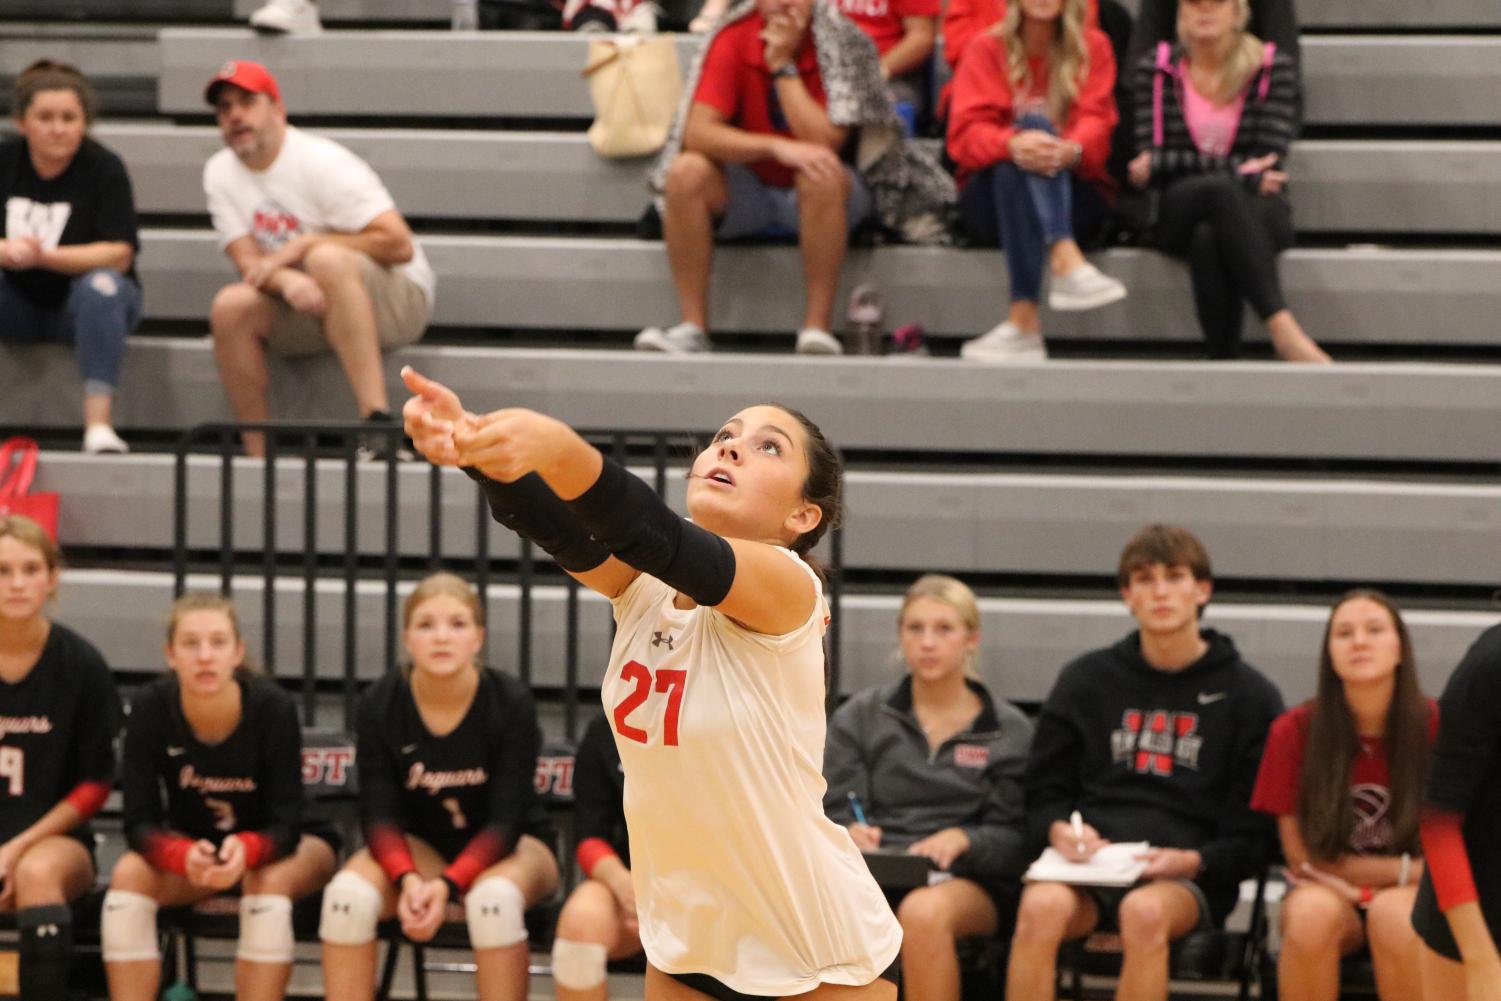 BV West Varsity volleyball beats BVH on 9/20